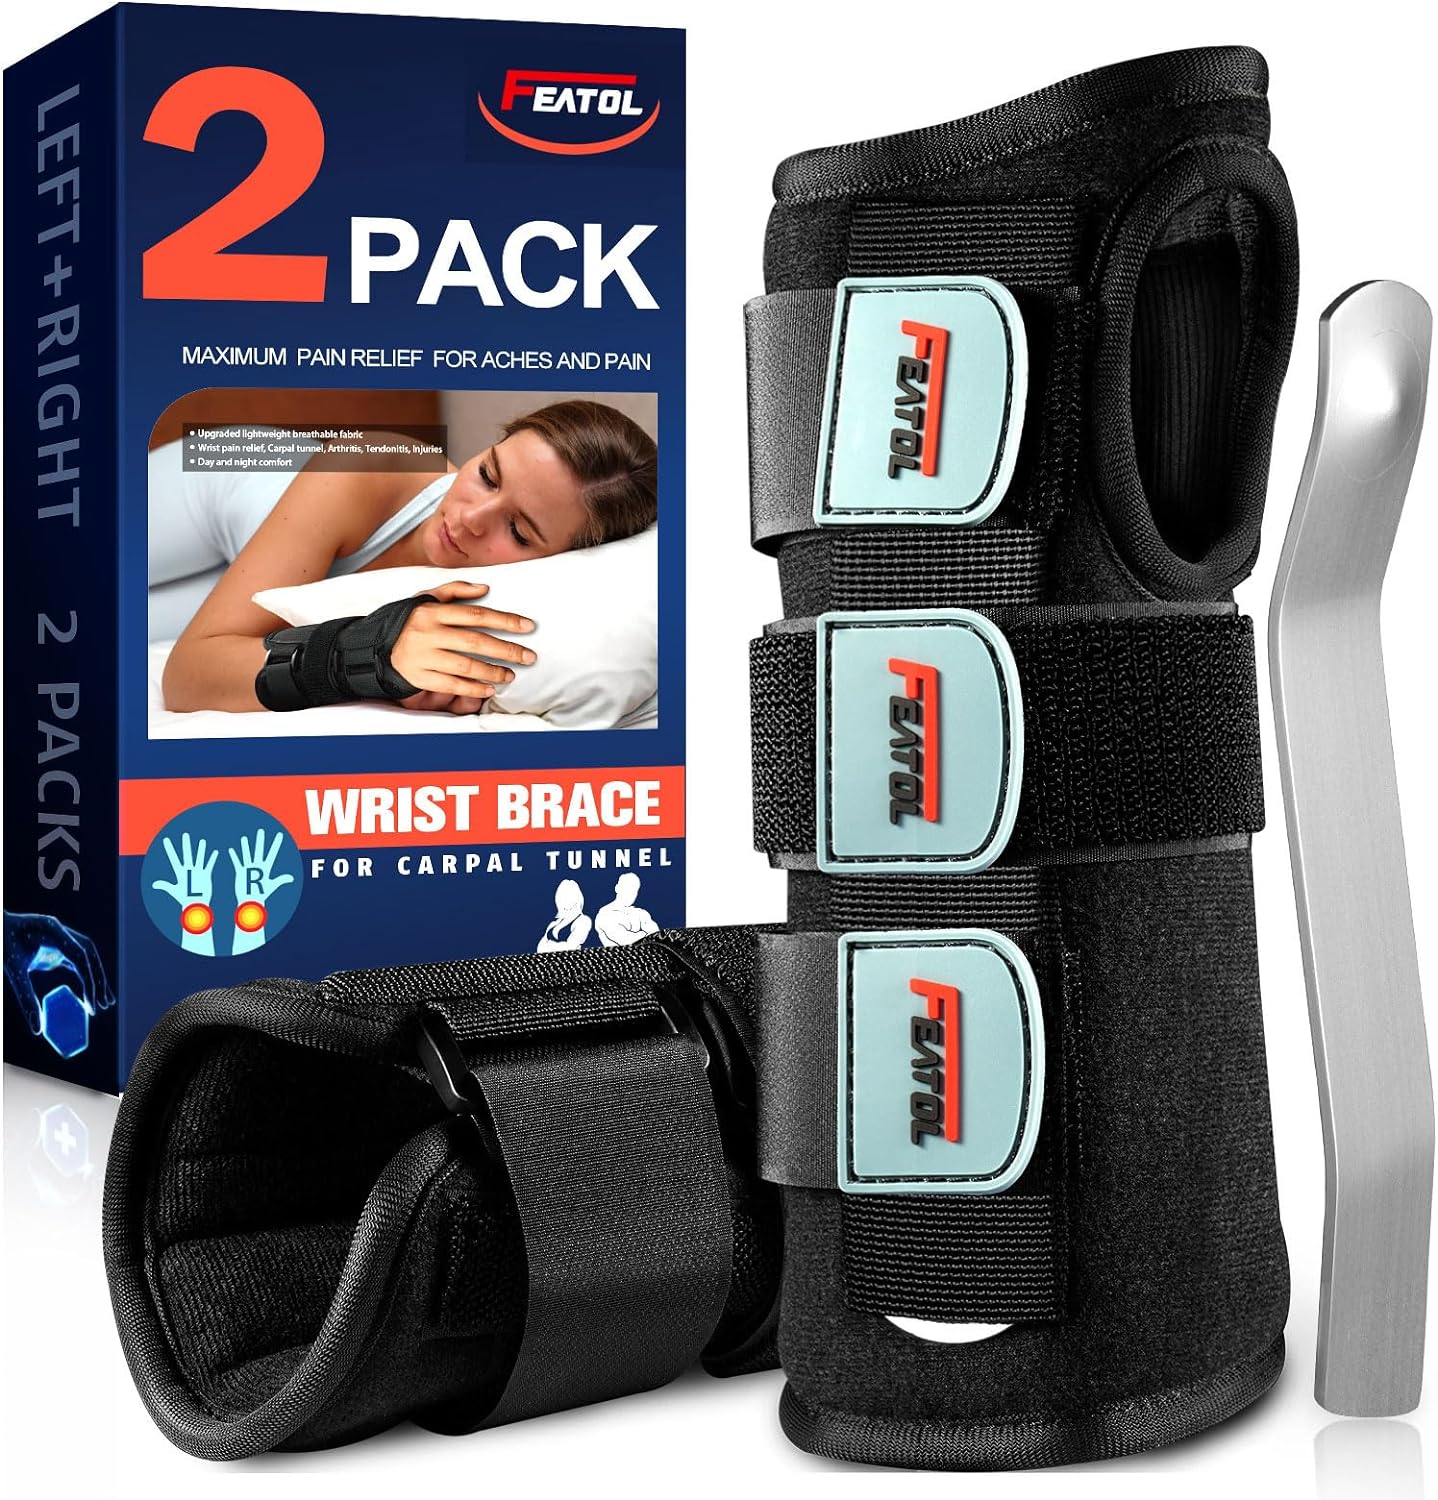 FEATOL 2 Pack Wrist Brace for Carpal Tunnel Relief, Adjustable Wrist Support Brace with Metal Splints Both Hands, Large/X-Large , Arm Compression Hand Support for Arthritis, Tendonitis, Sprain, Injuries, Wrist Pain, Right and Left